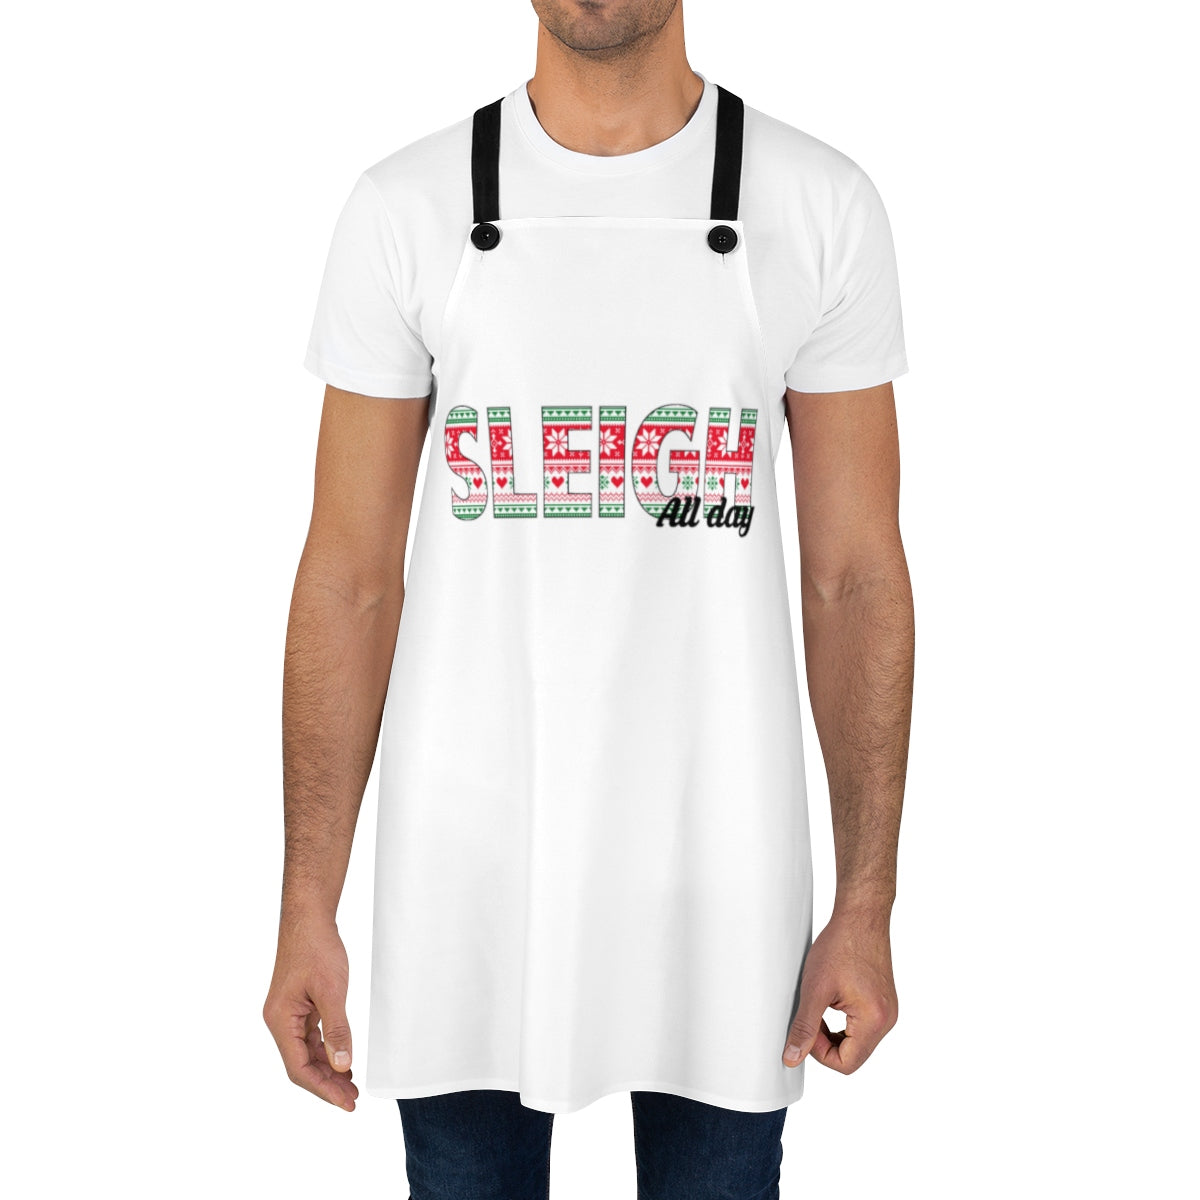 sleigh all day Apron - MCE Creations